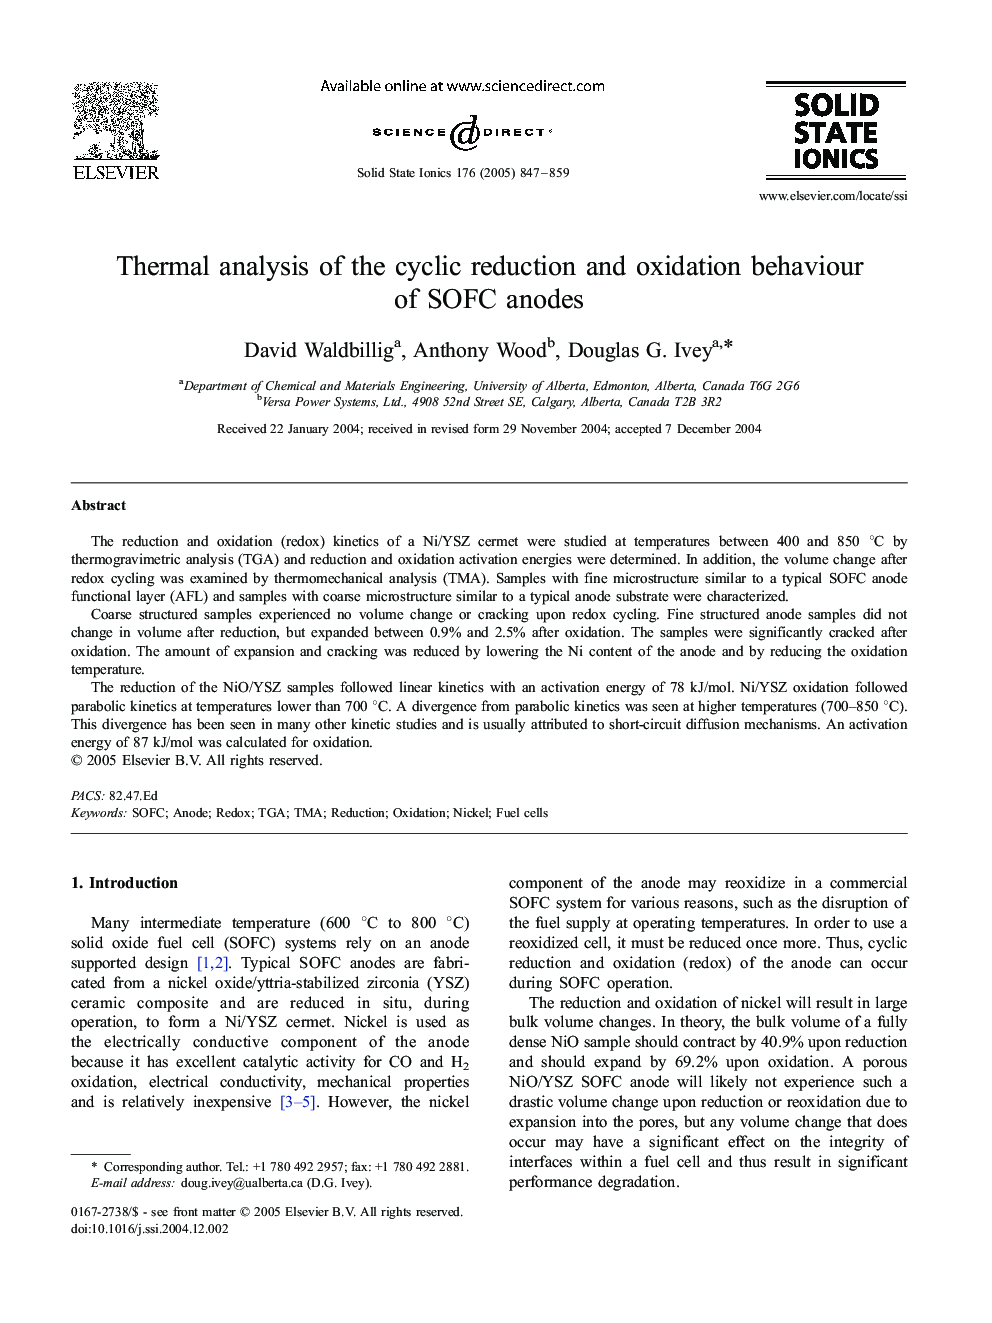 Thermal analysis of the cyclic reduction and oxidation behaviour of SOFC anodes